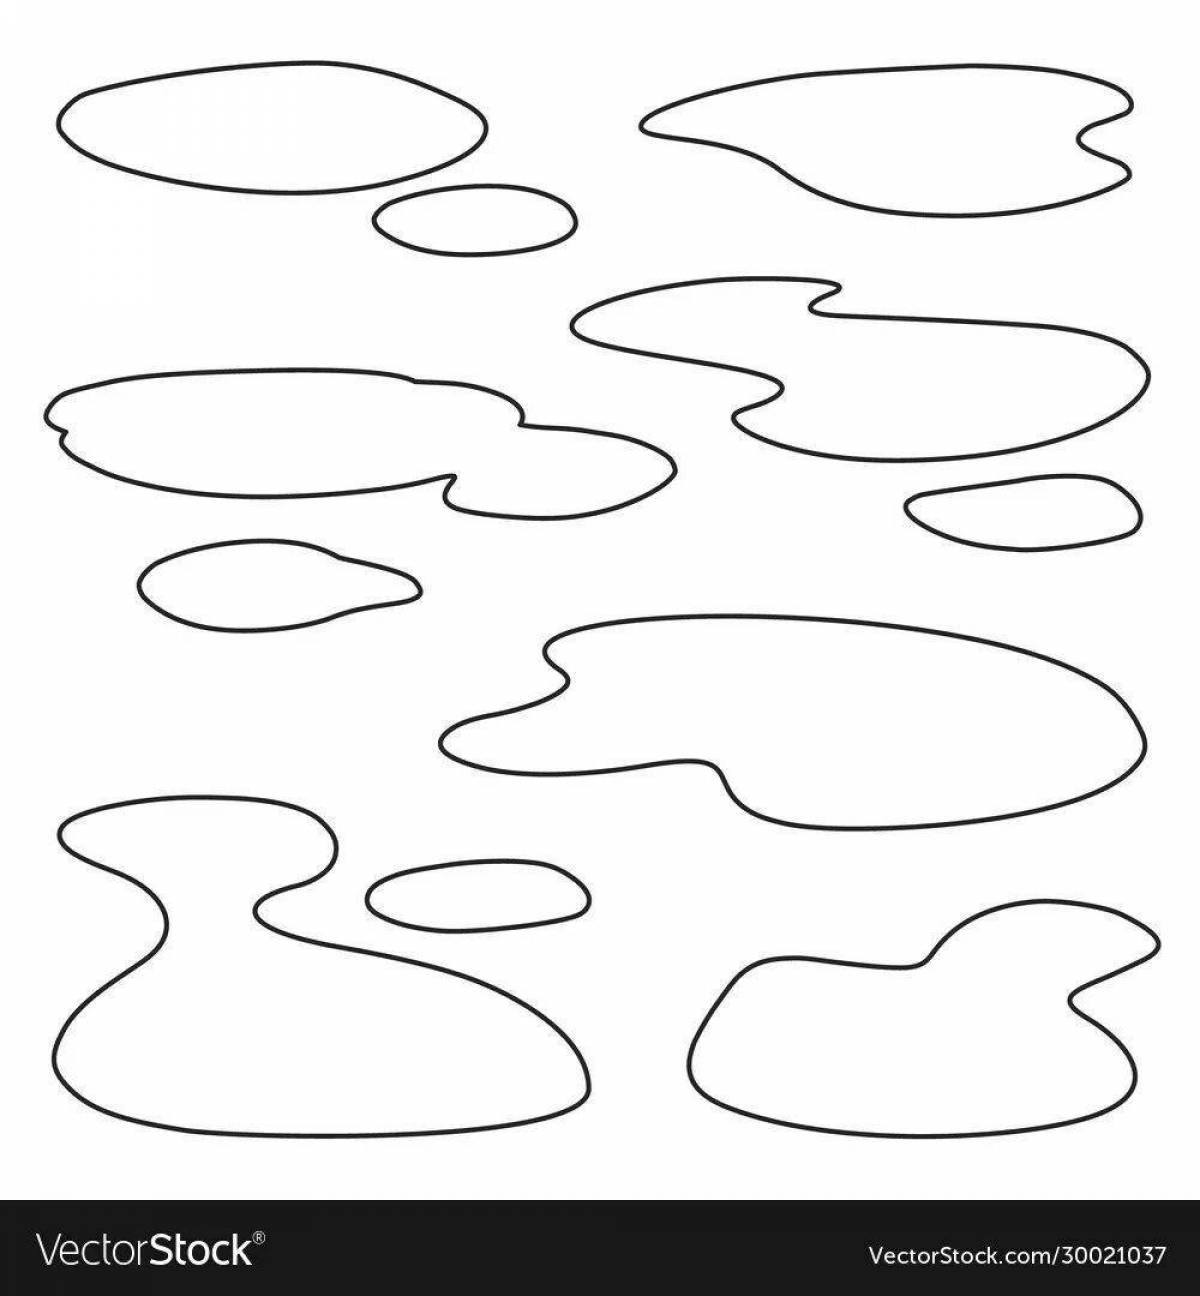 Colorful puddle coloring page